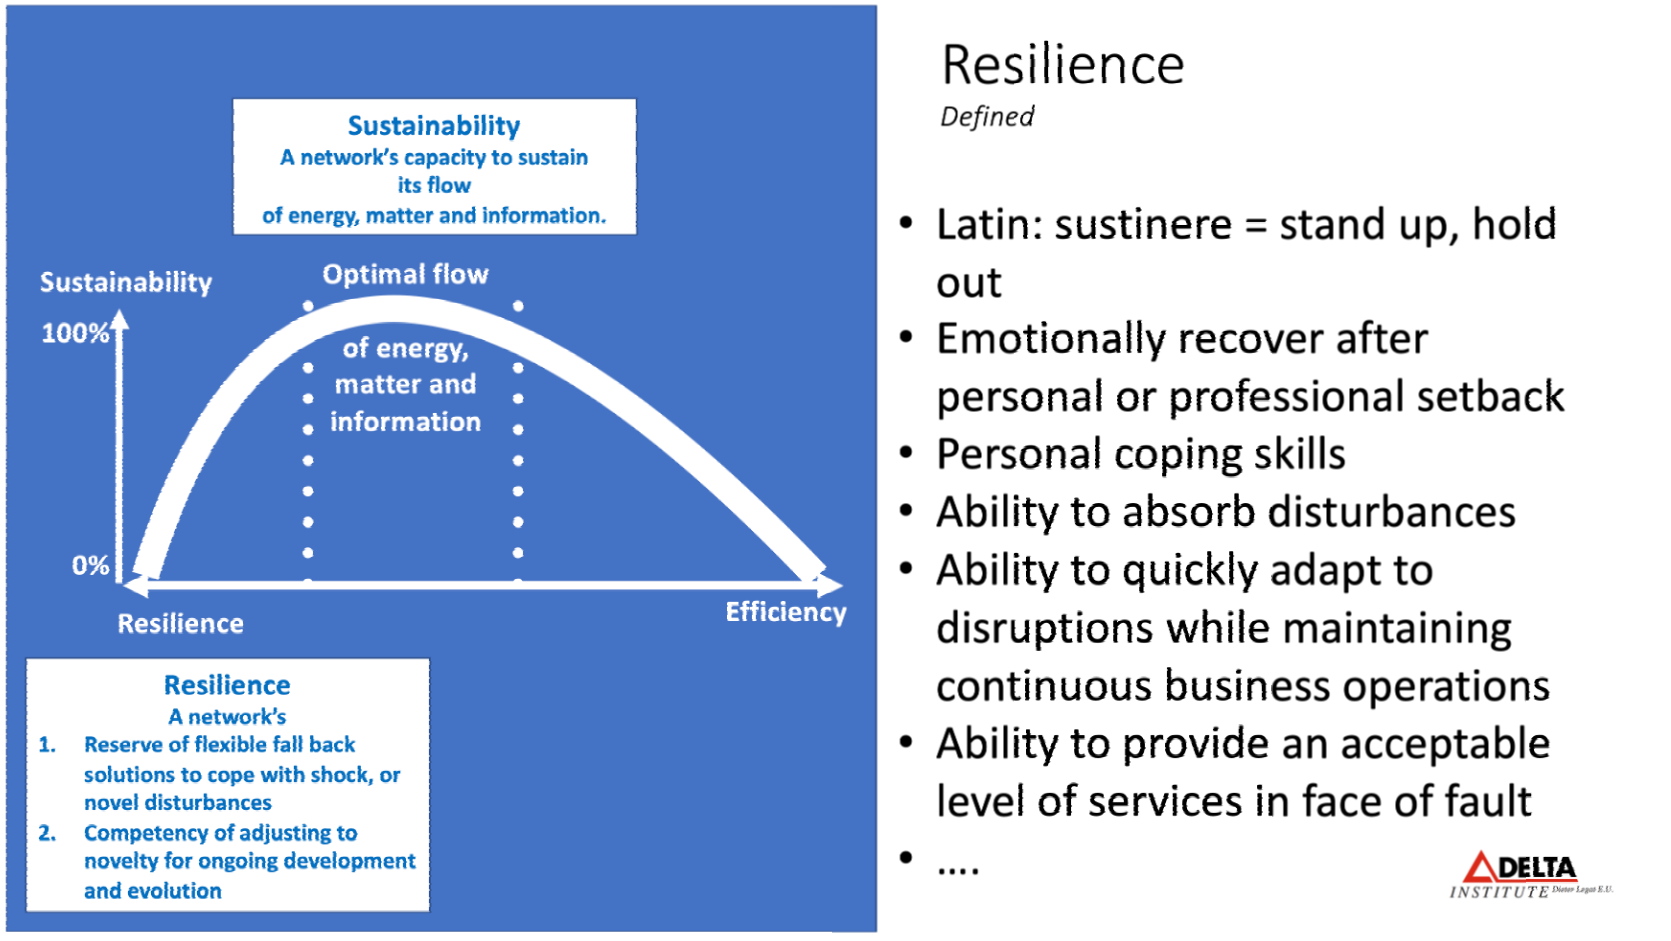 The Law of Sustainability by Lietaer - What is Resilience?